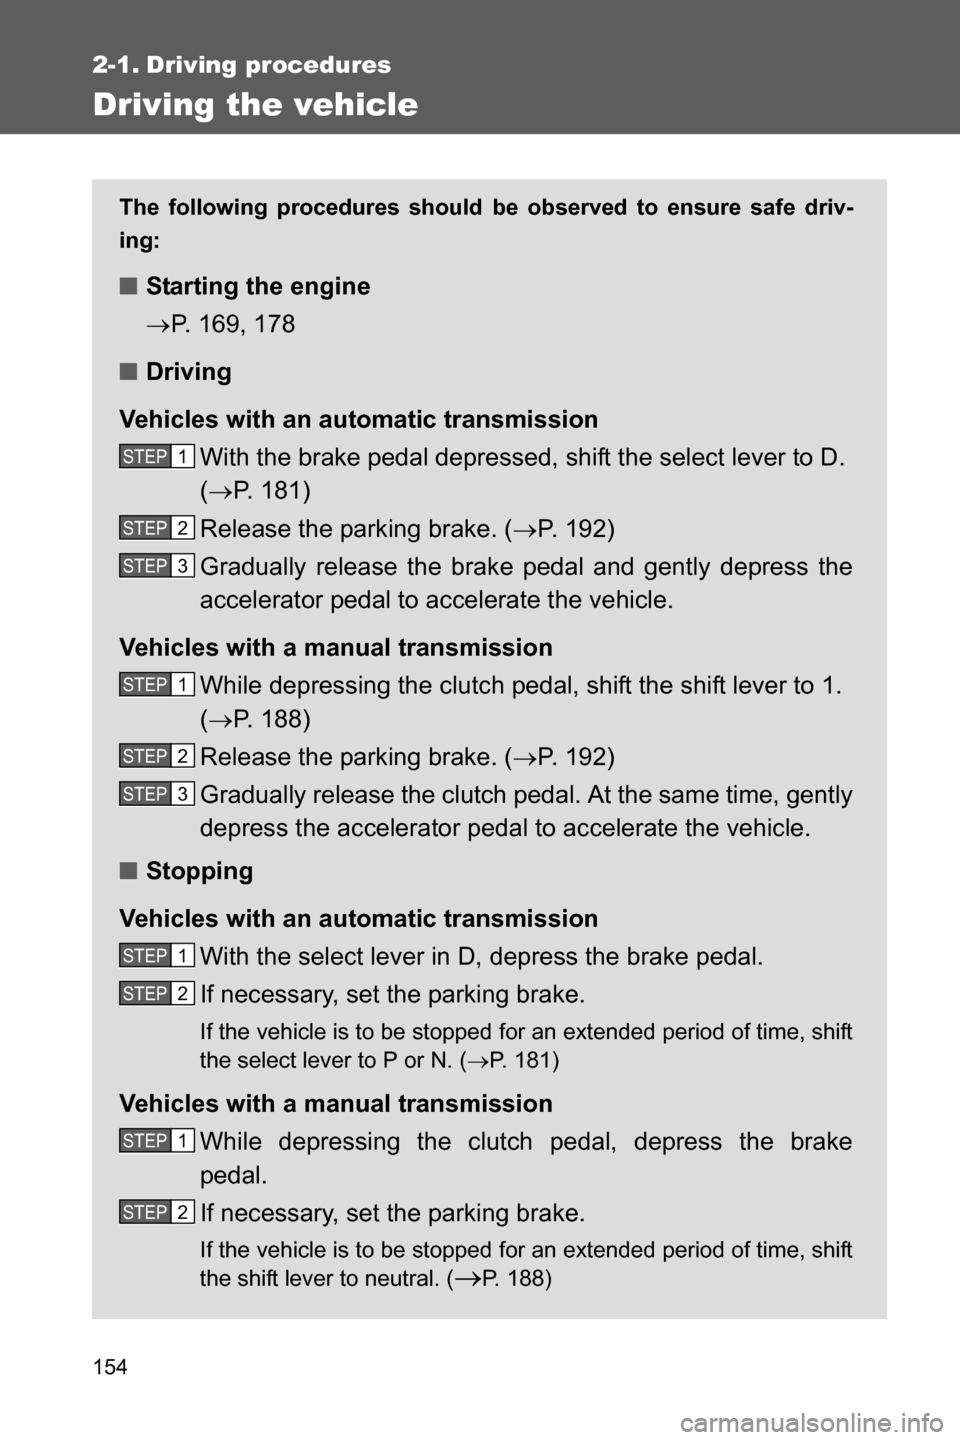 SUBARU BRZ 2017 1.G Owners Manual 154
2-1. Driving procedures
Driving the vehicle
The following procedures should be observed to ensure safe driv-
ing:
■Starting the engine
�oP. 169, 178
■Driving
Vehicles with an automatic transmi